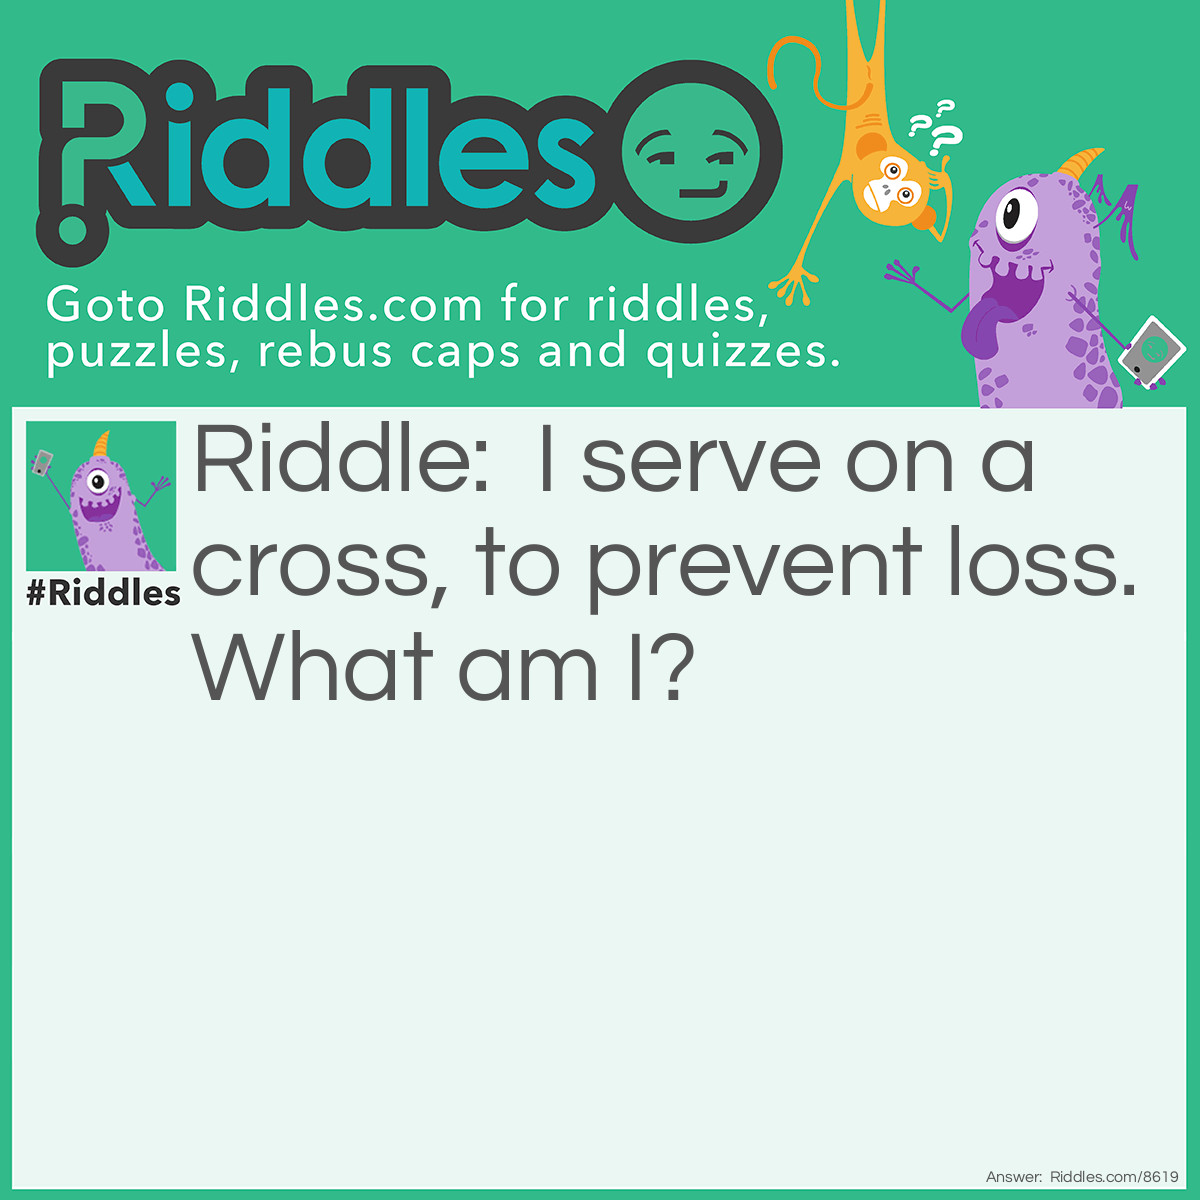 Riddle: I serve on a cross, to prevent loss. What am I? Answer: A scarecrow.